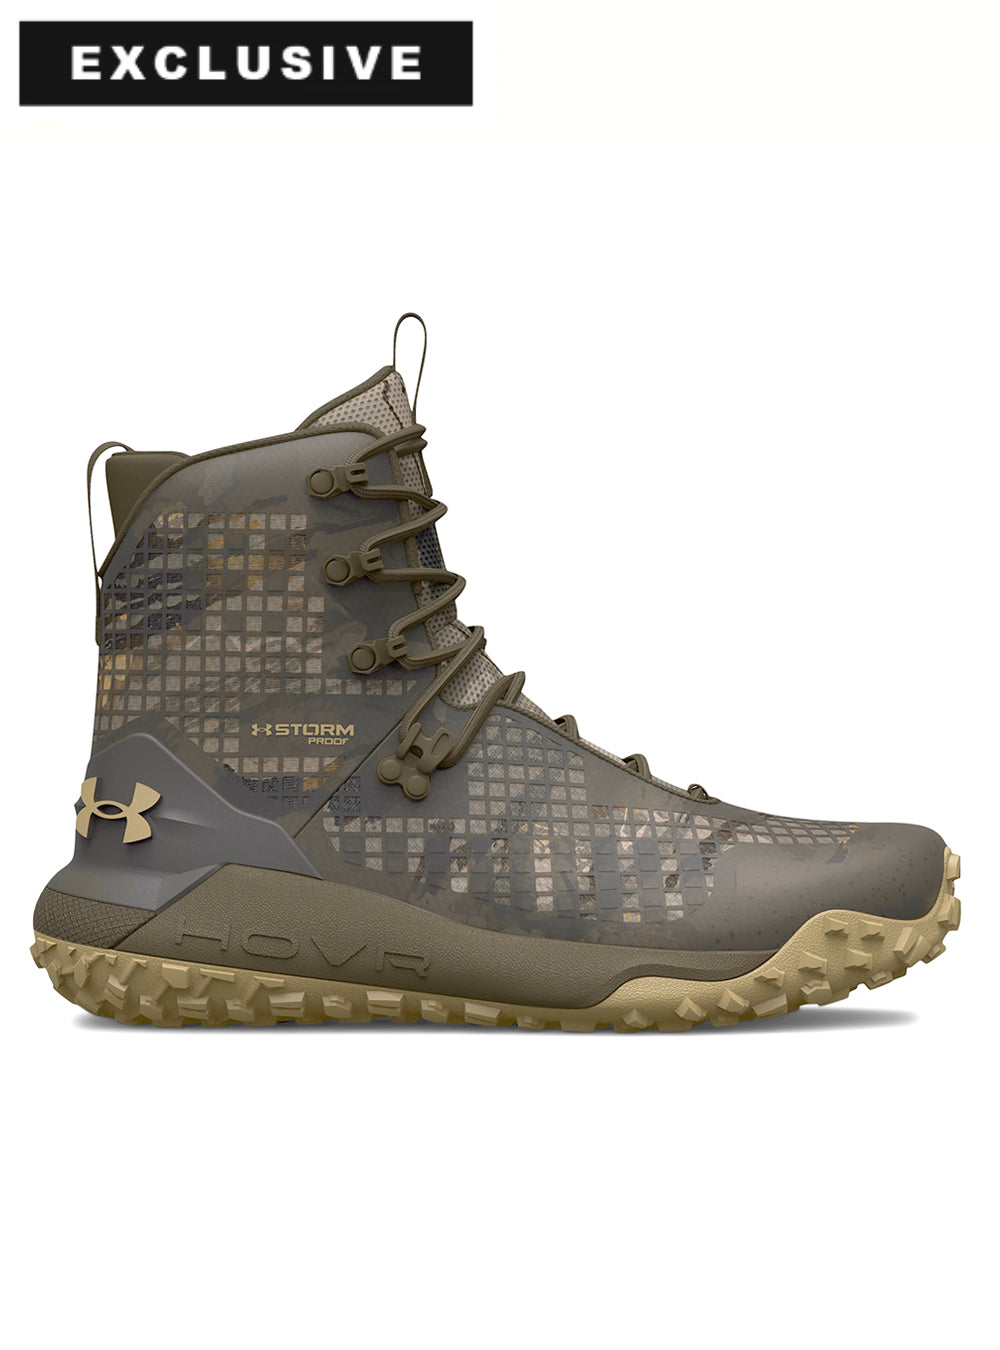 EXCLUSIVE - Under Armour HOVR™ Dawn Waterproof 2.0 Boots - Ridge Reaper Camo